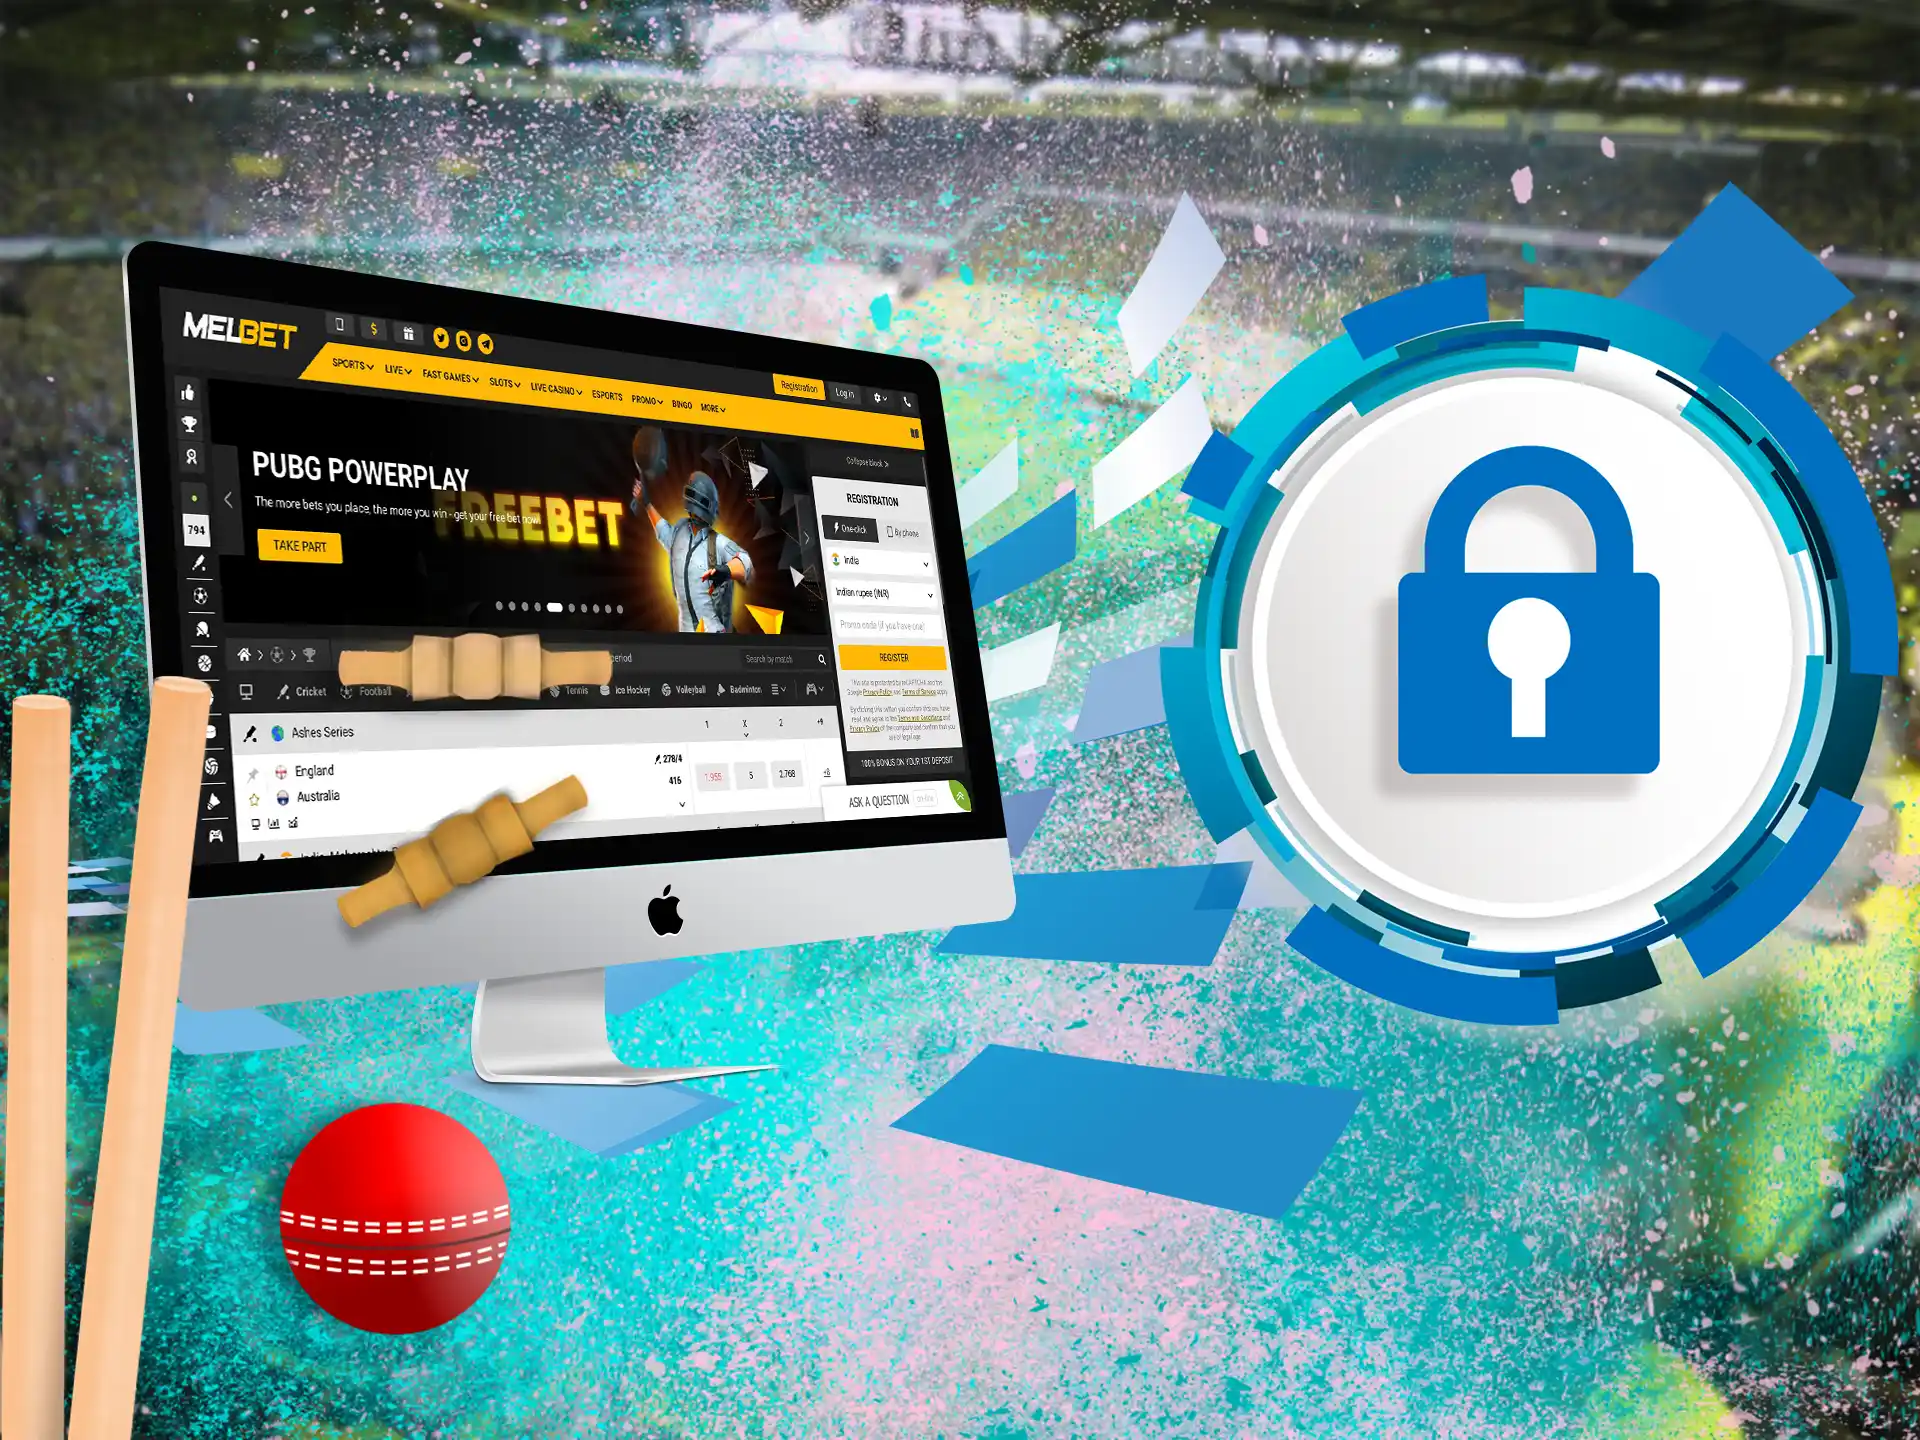 Before choosing a bookmaker for betting, check whether it protects your personal data, whether it have a special license.